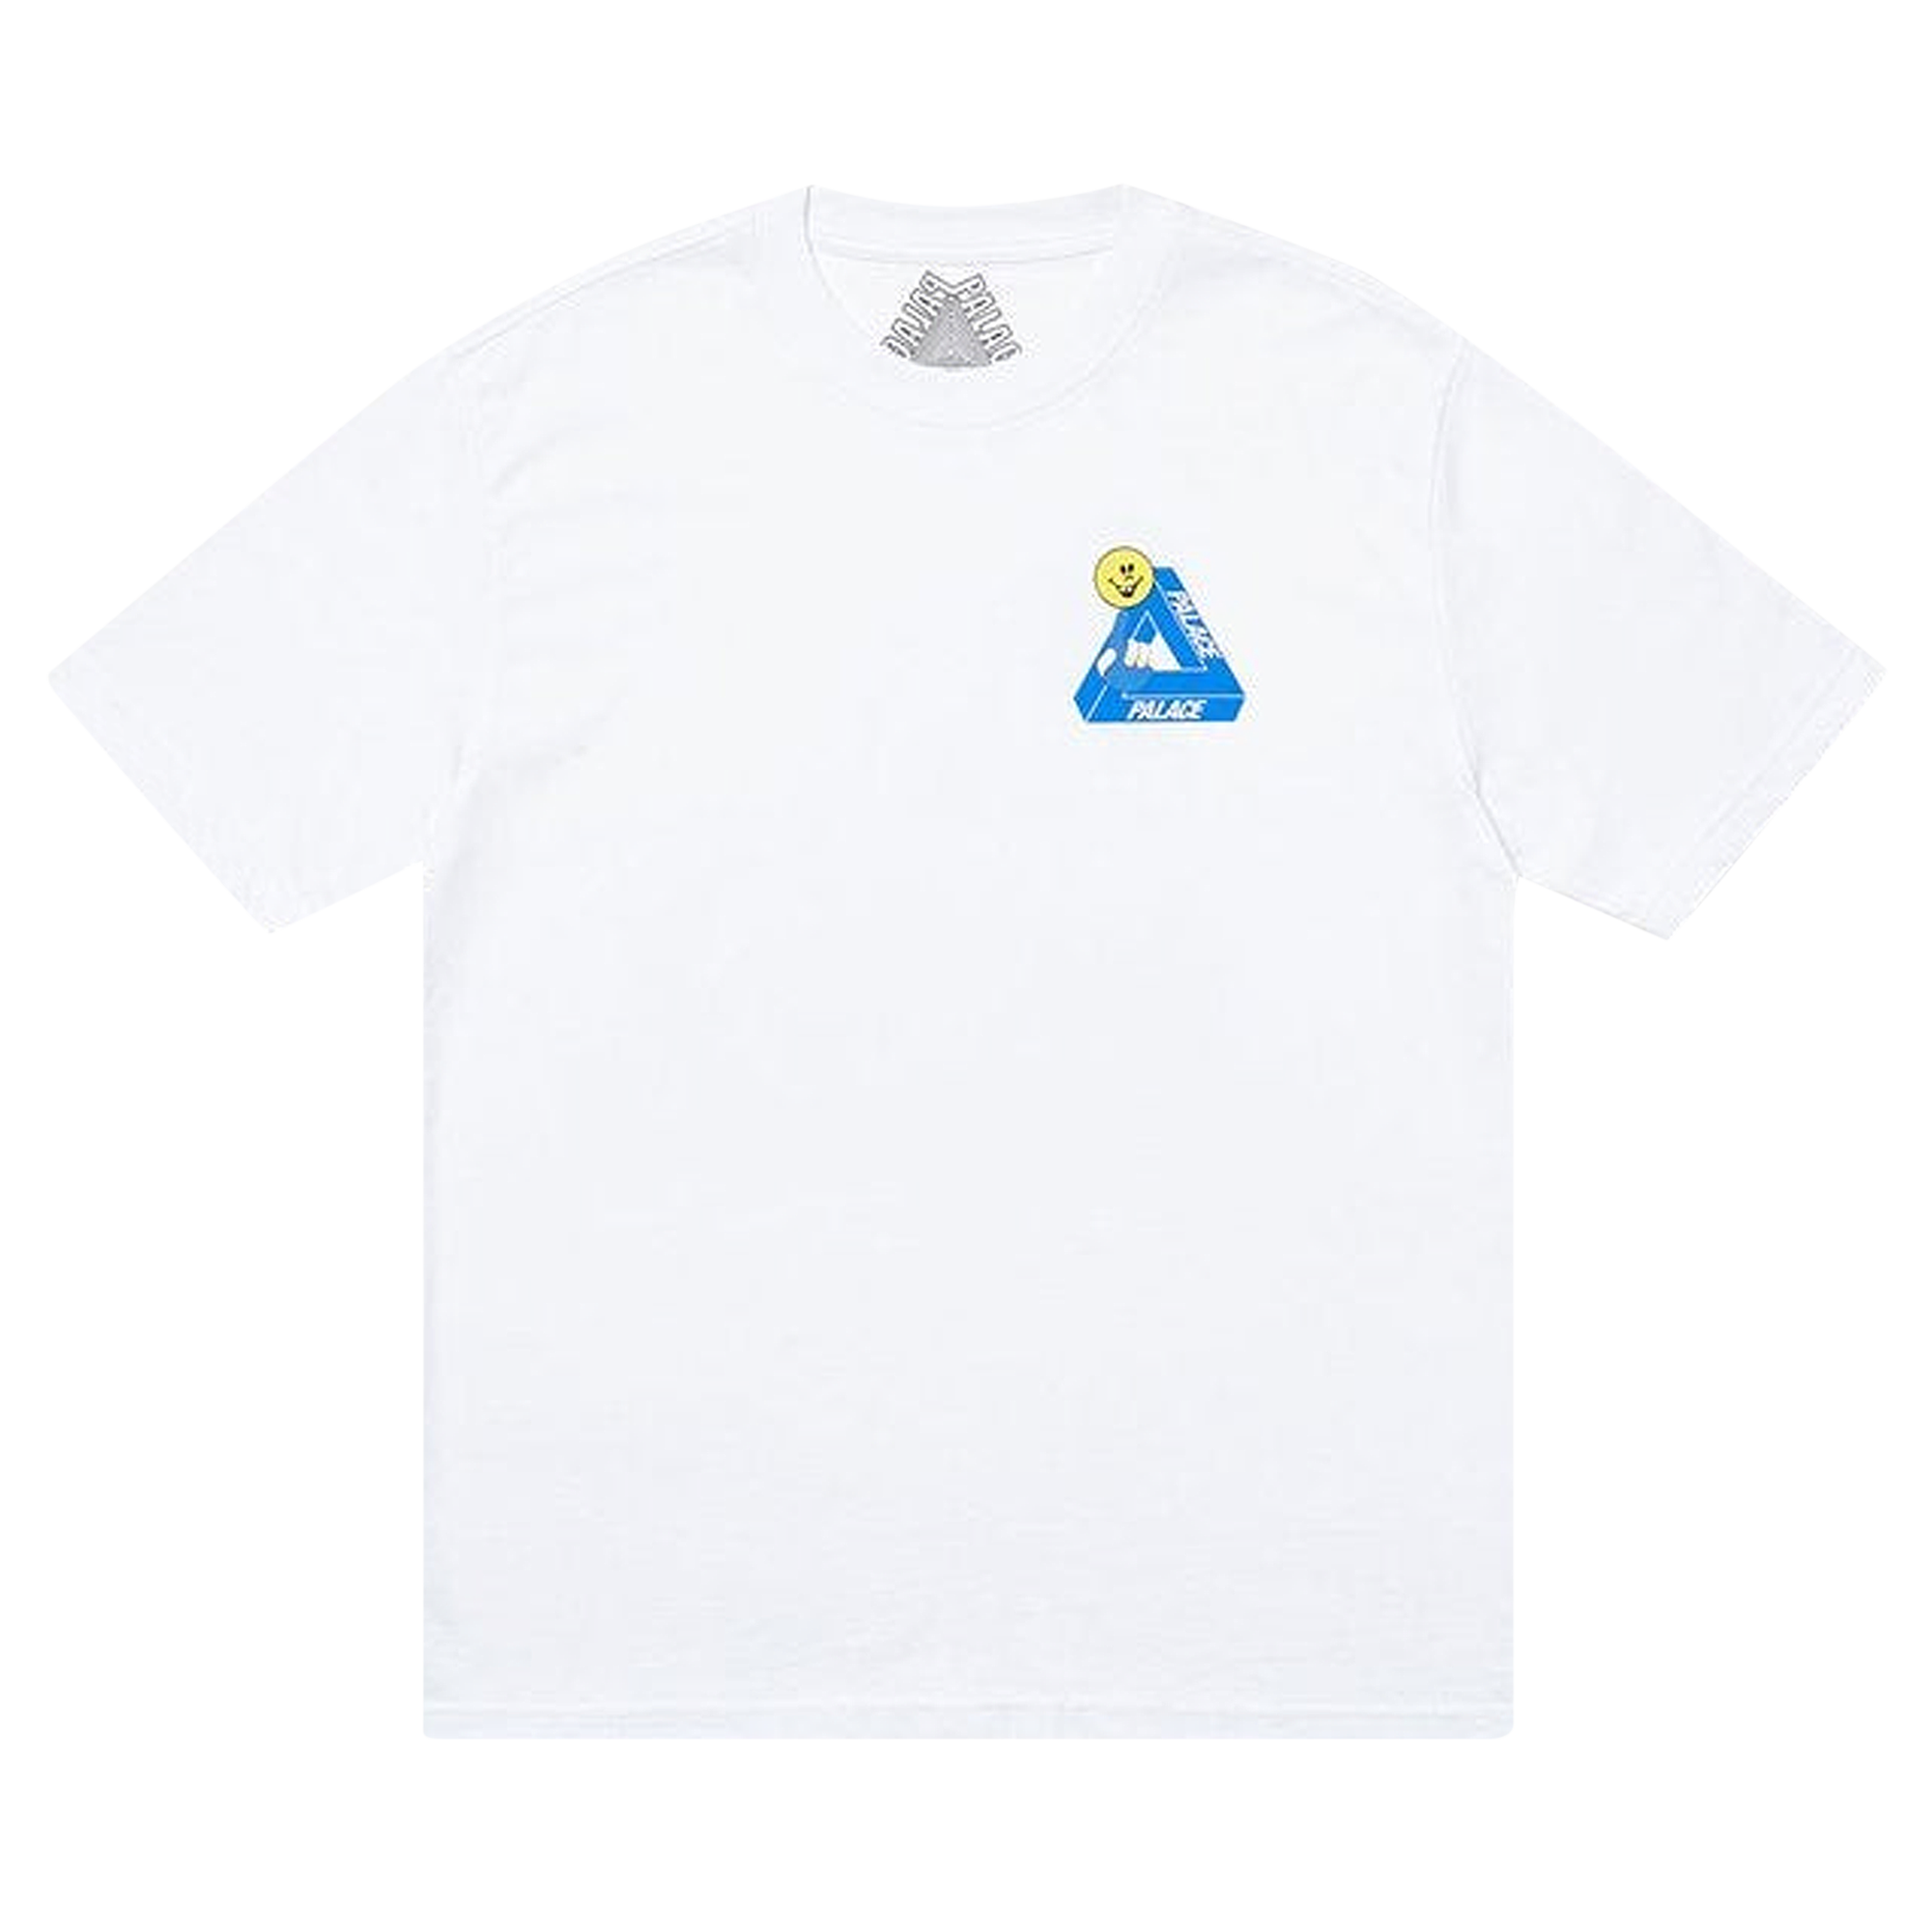 Pre-owned Palace Tri-smiler T-shirt 'white'